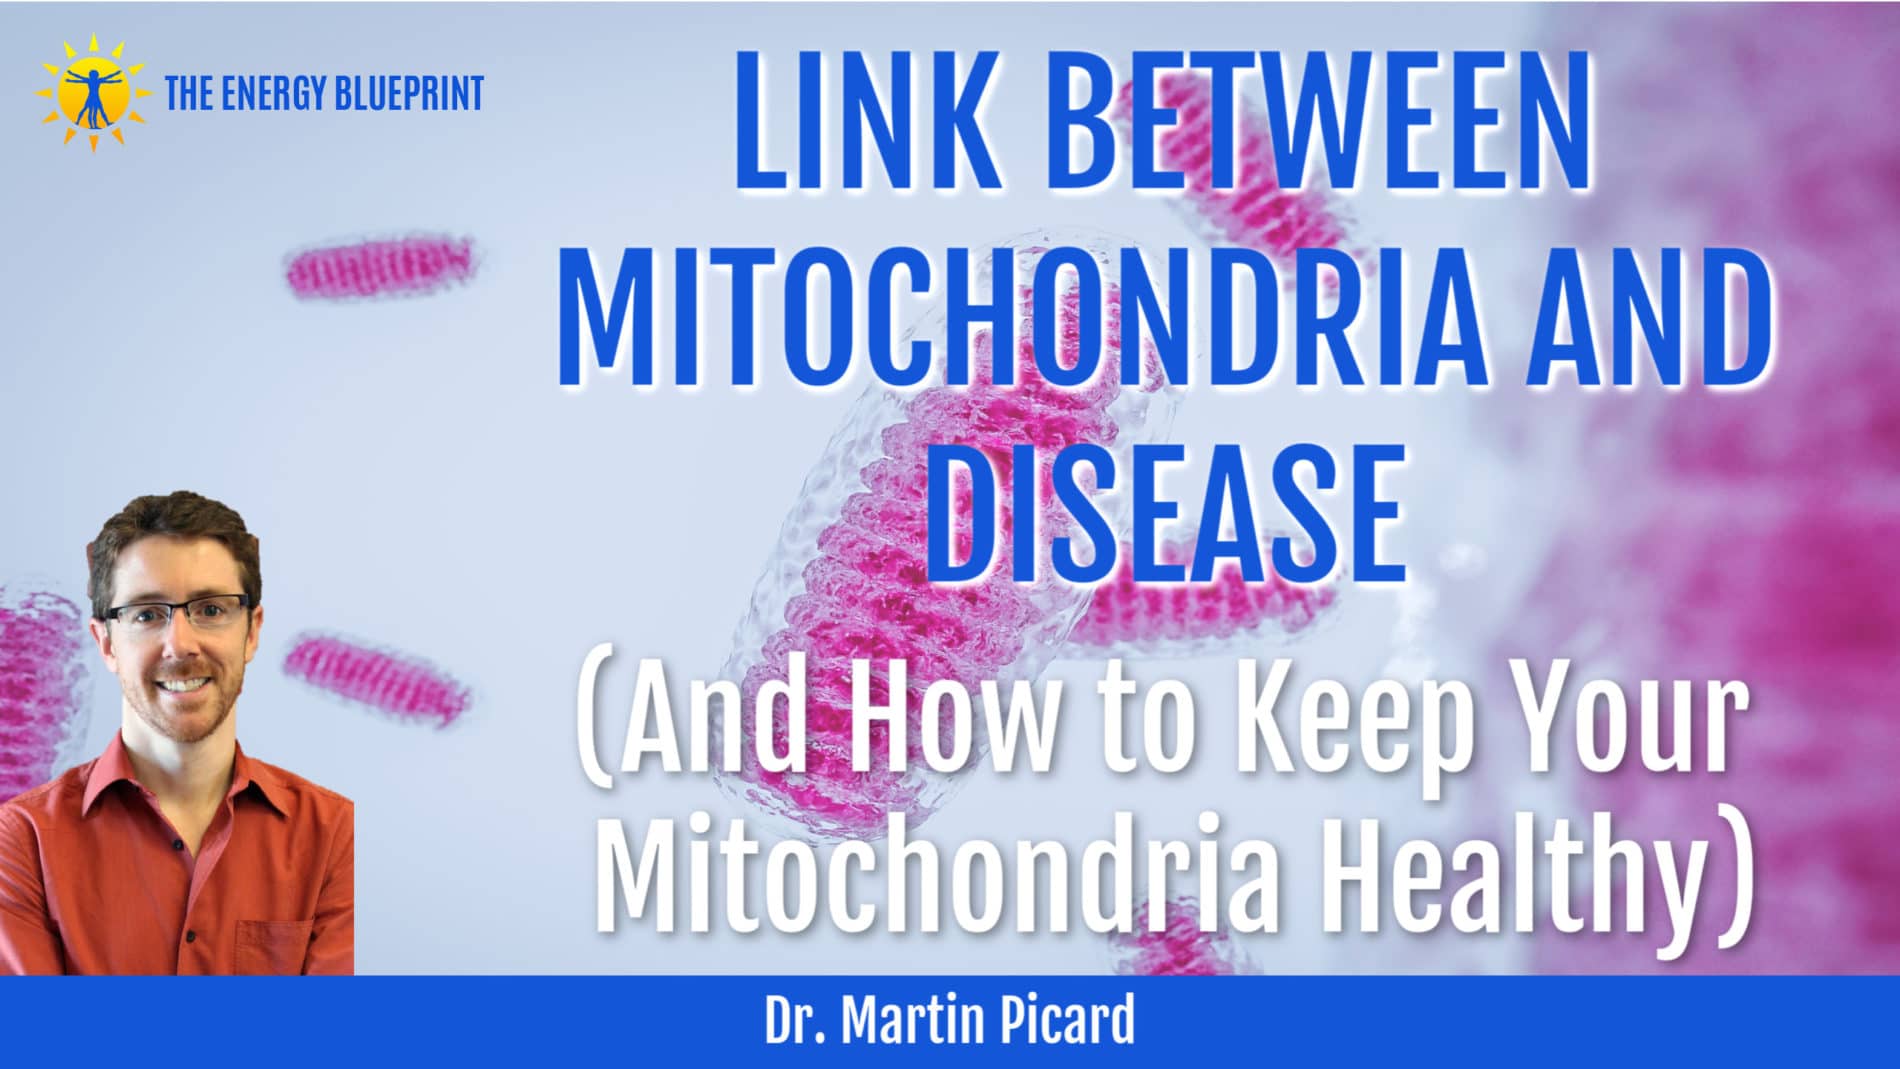 Dr. Martin Picard on LINK BETWEEN MITOCHONDRIA AND DISEASE (And How to Keep Your Mitochondria Healthy)